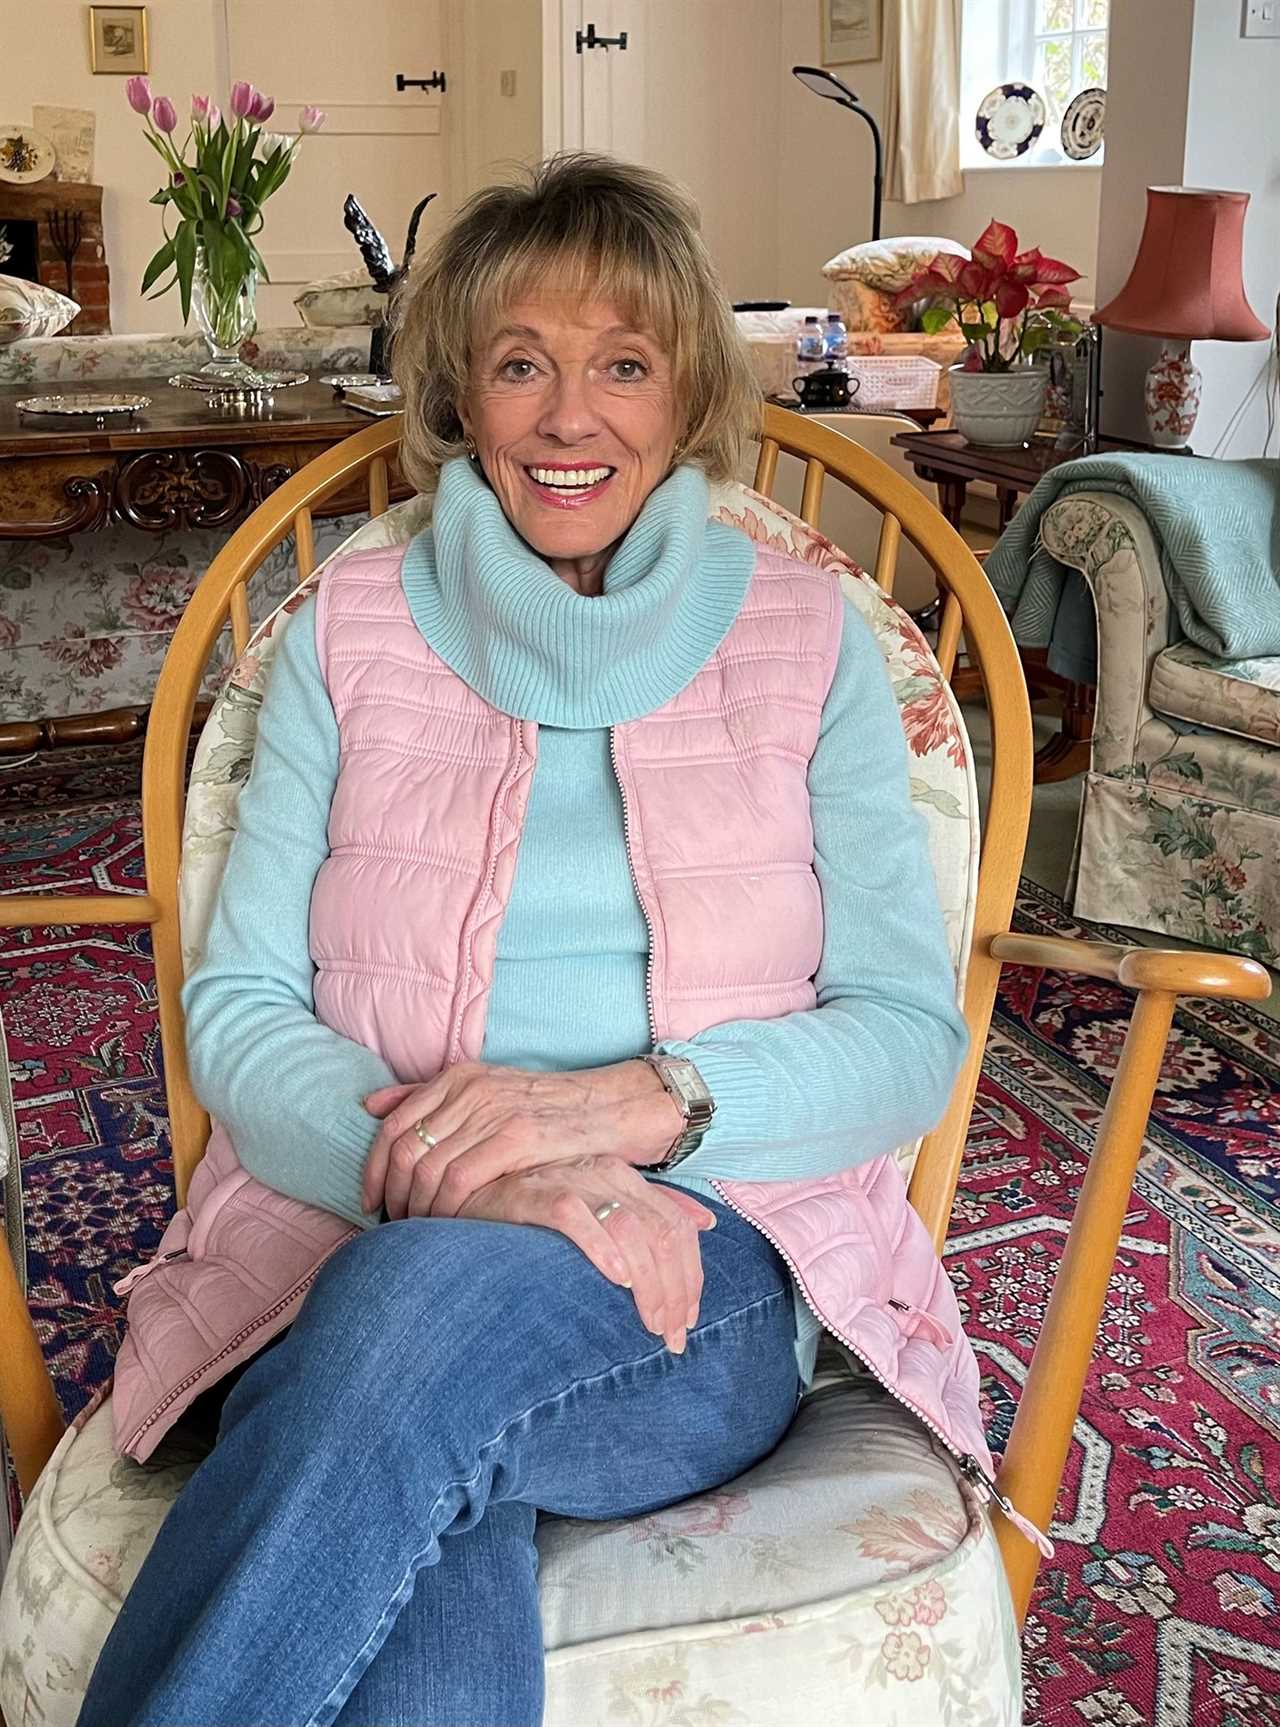 As Esther Rantzen reveals lung cancer diagnosis – the 8 symptoms you need to know